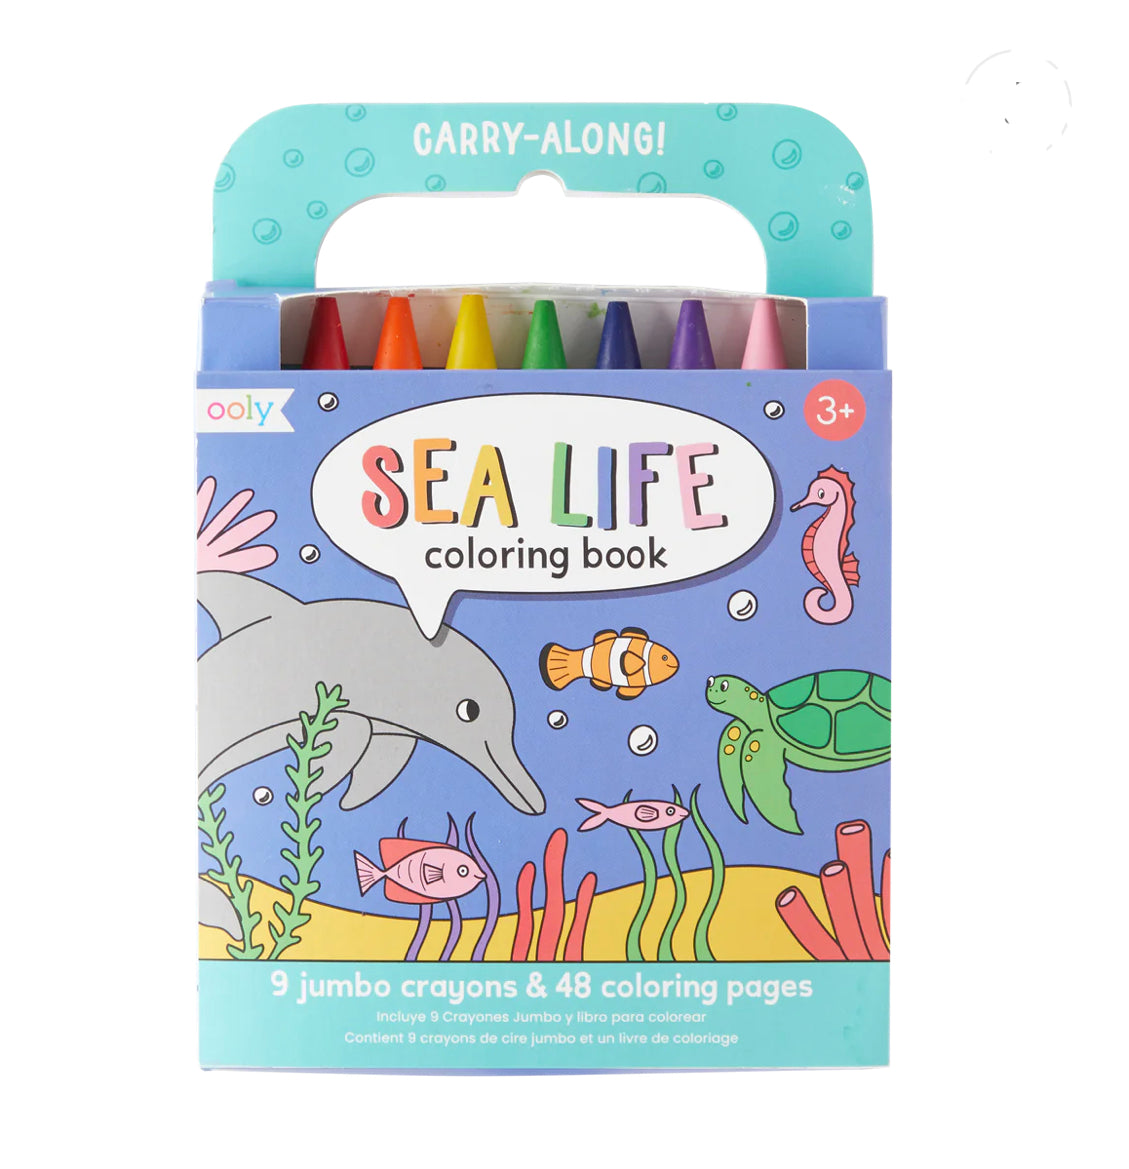 Ooly carry along crayons and coloring book sea life